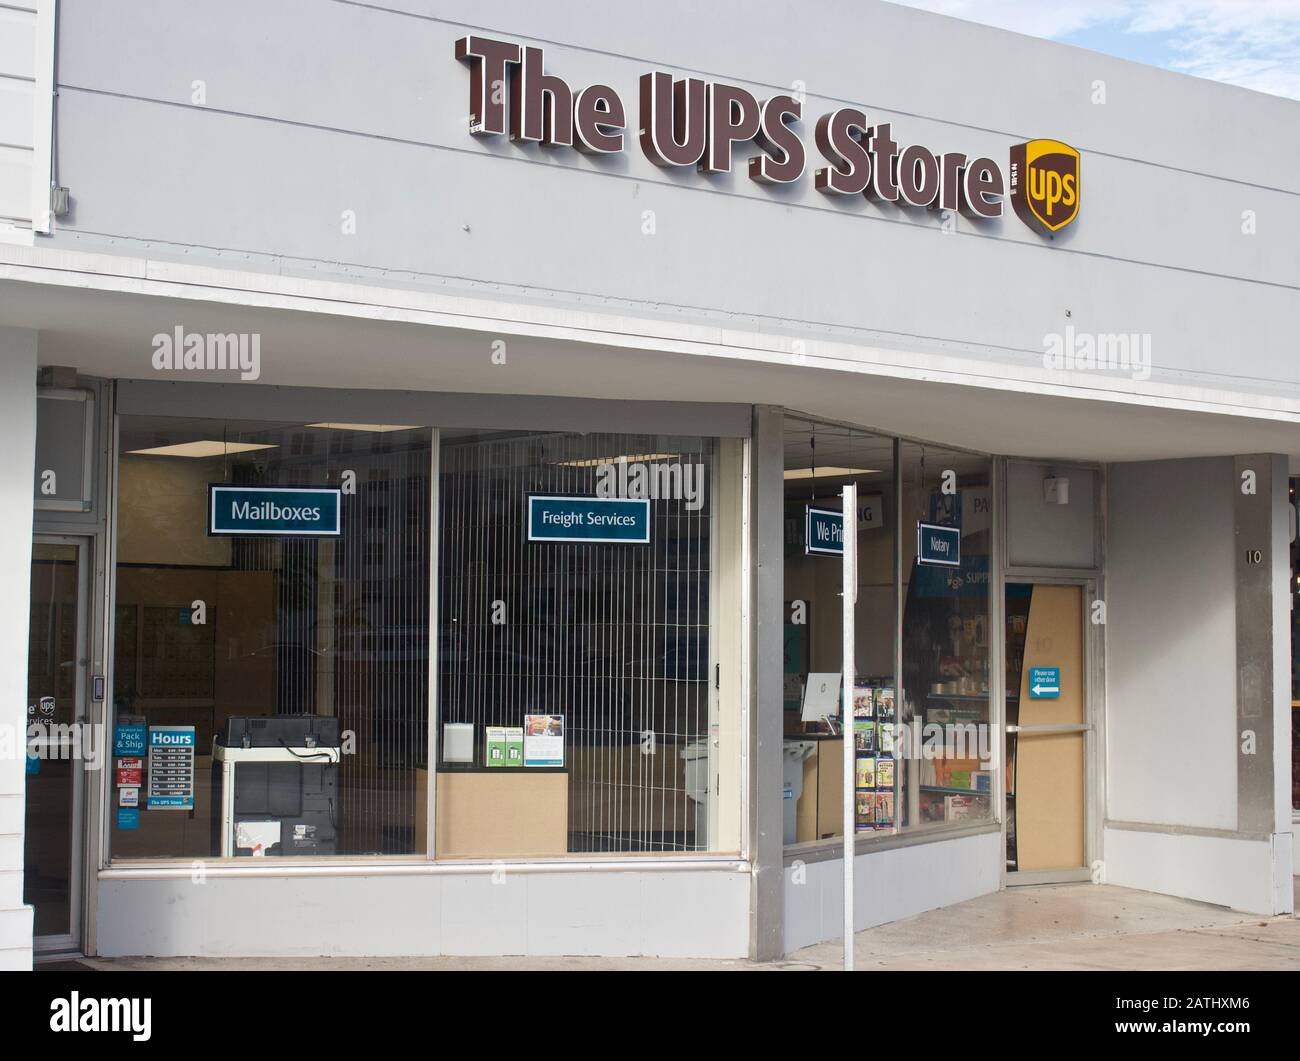 Miami Springs Florida August 17,2019- The UPS Store, Inc. is the world’s largest franchisor of retail shipping, postal, printing and business service. Stock Photo